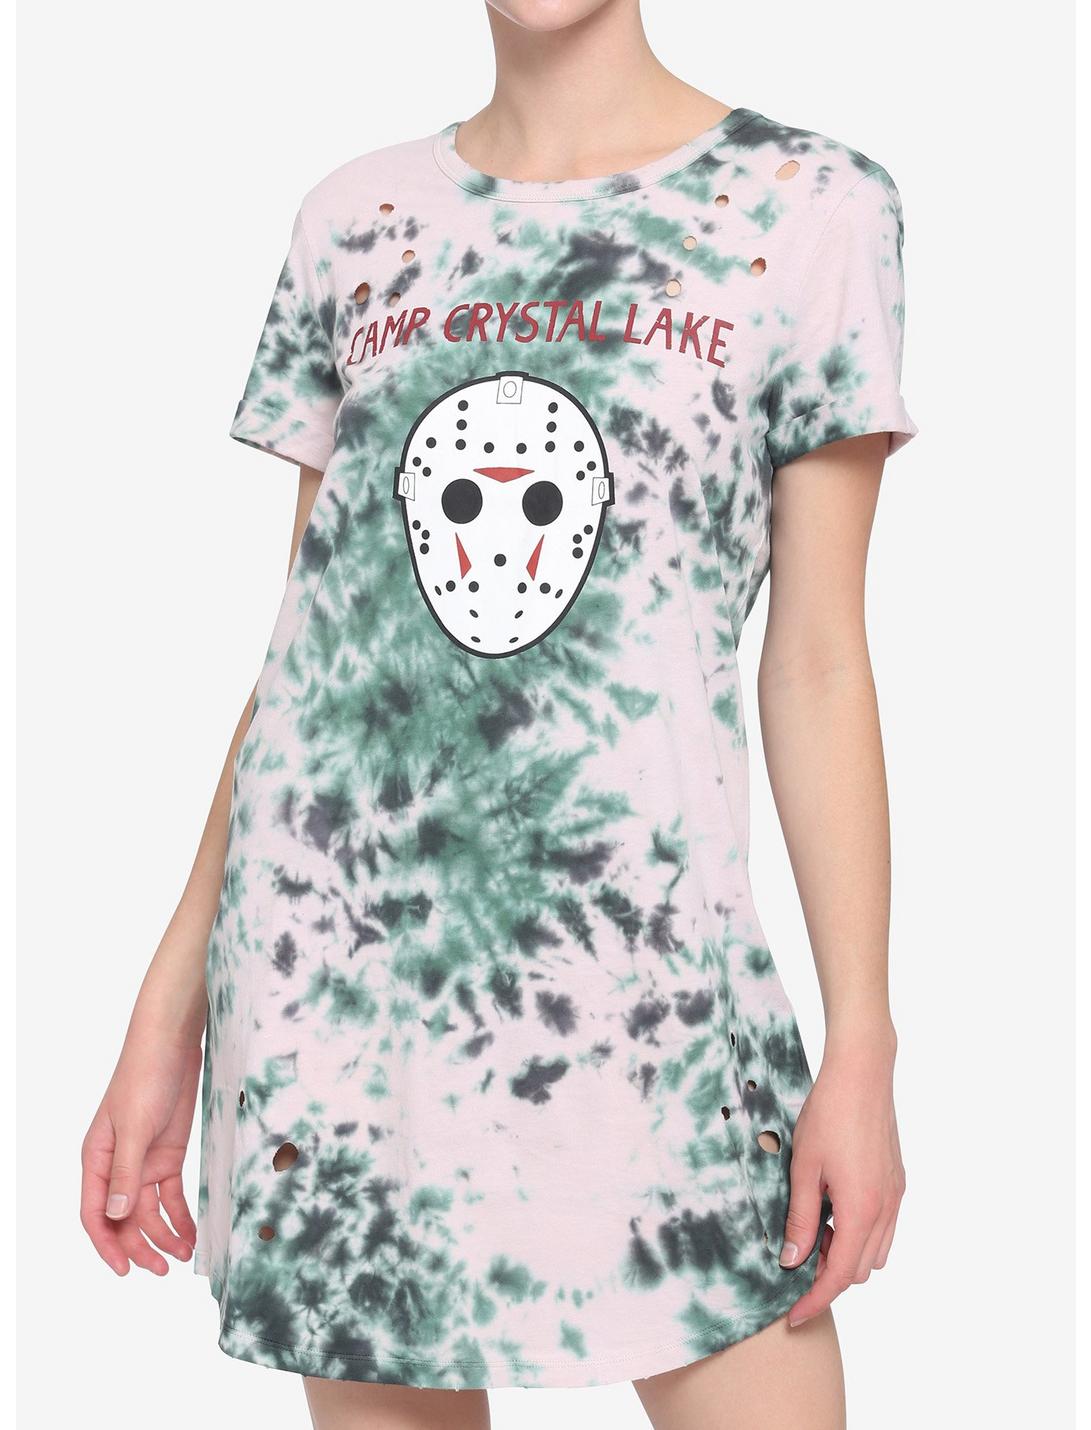 Friday The 13th Camp Crystal Lake Distressed Tie-Dye T-Shirt Dress, MULTI, hi-res